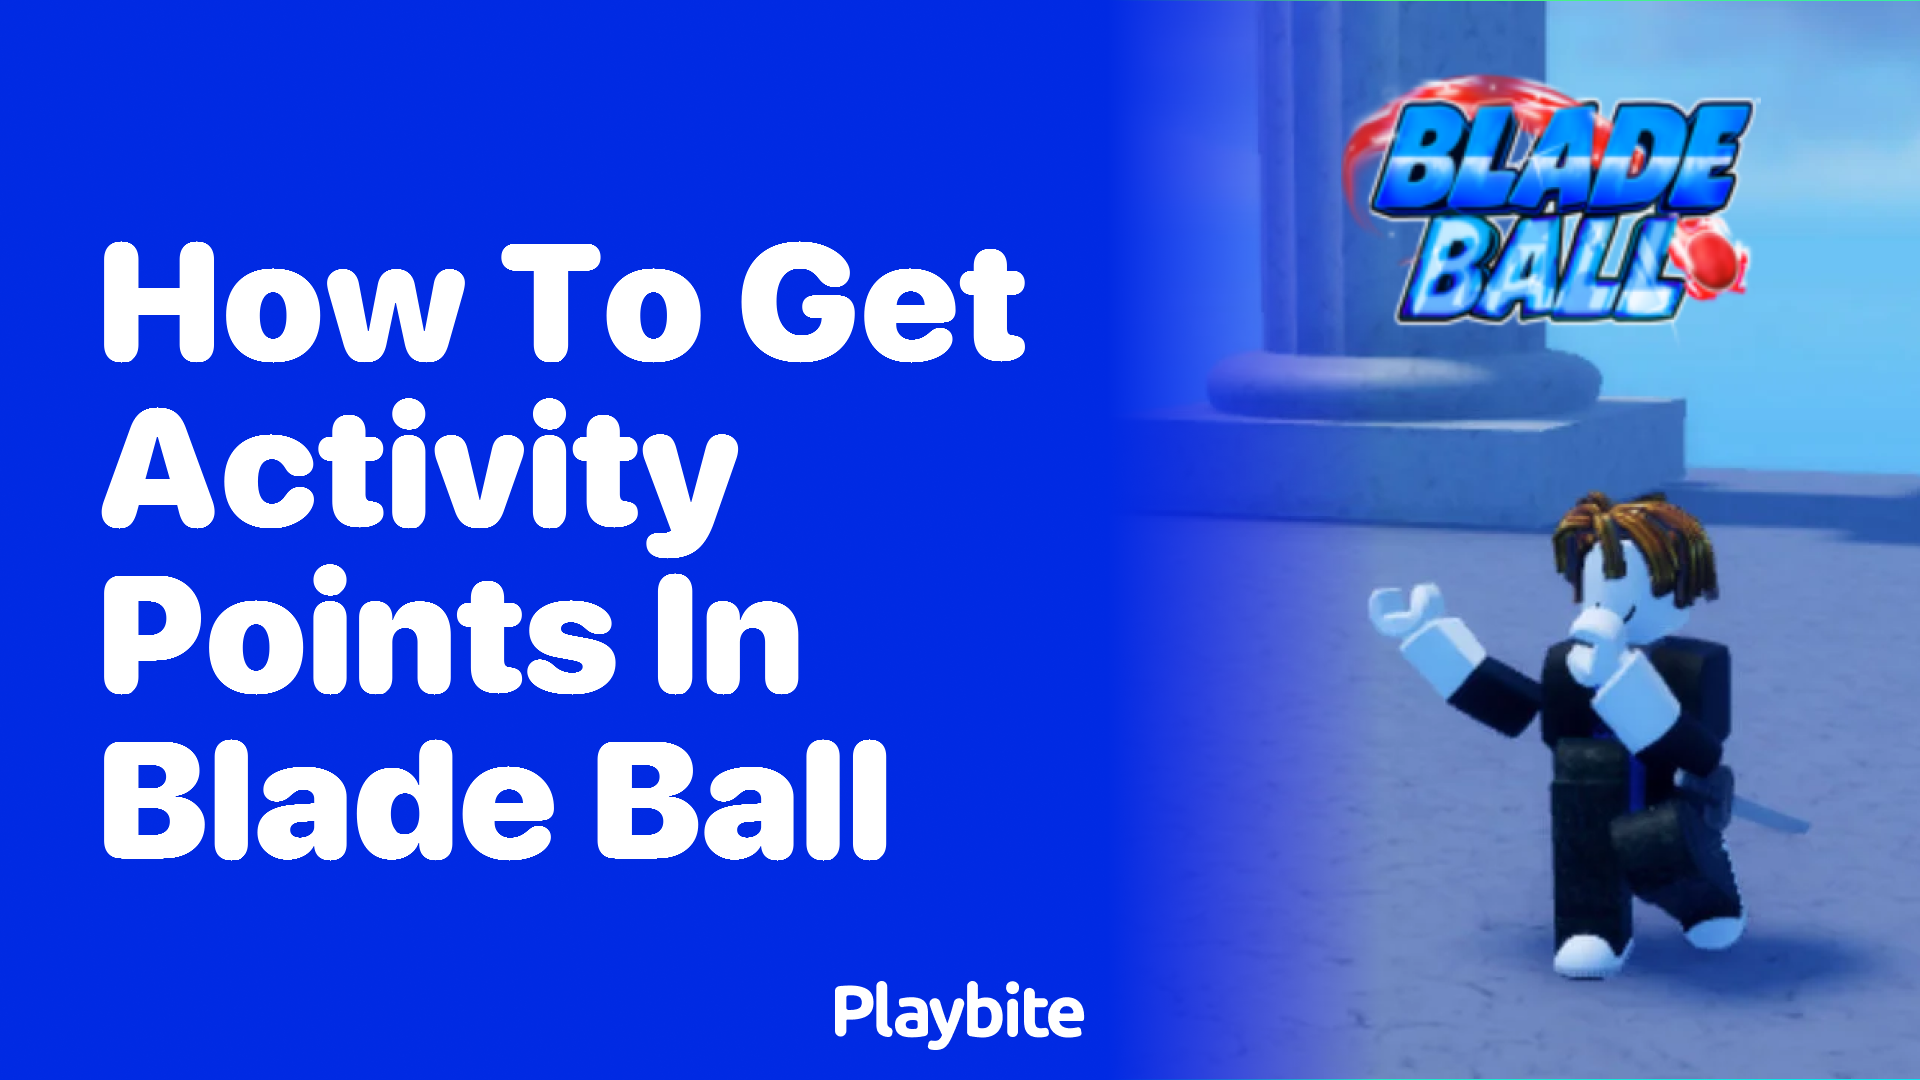 How to Get Activity Points in Blade Ball: A Quick Guide